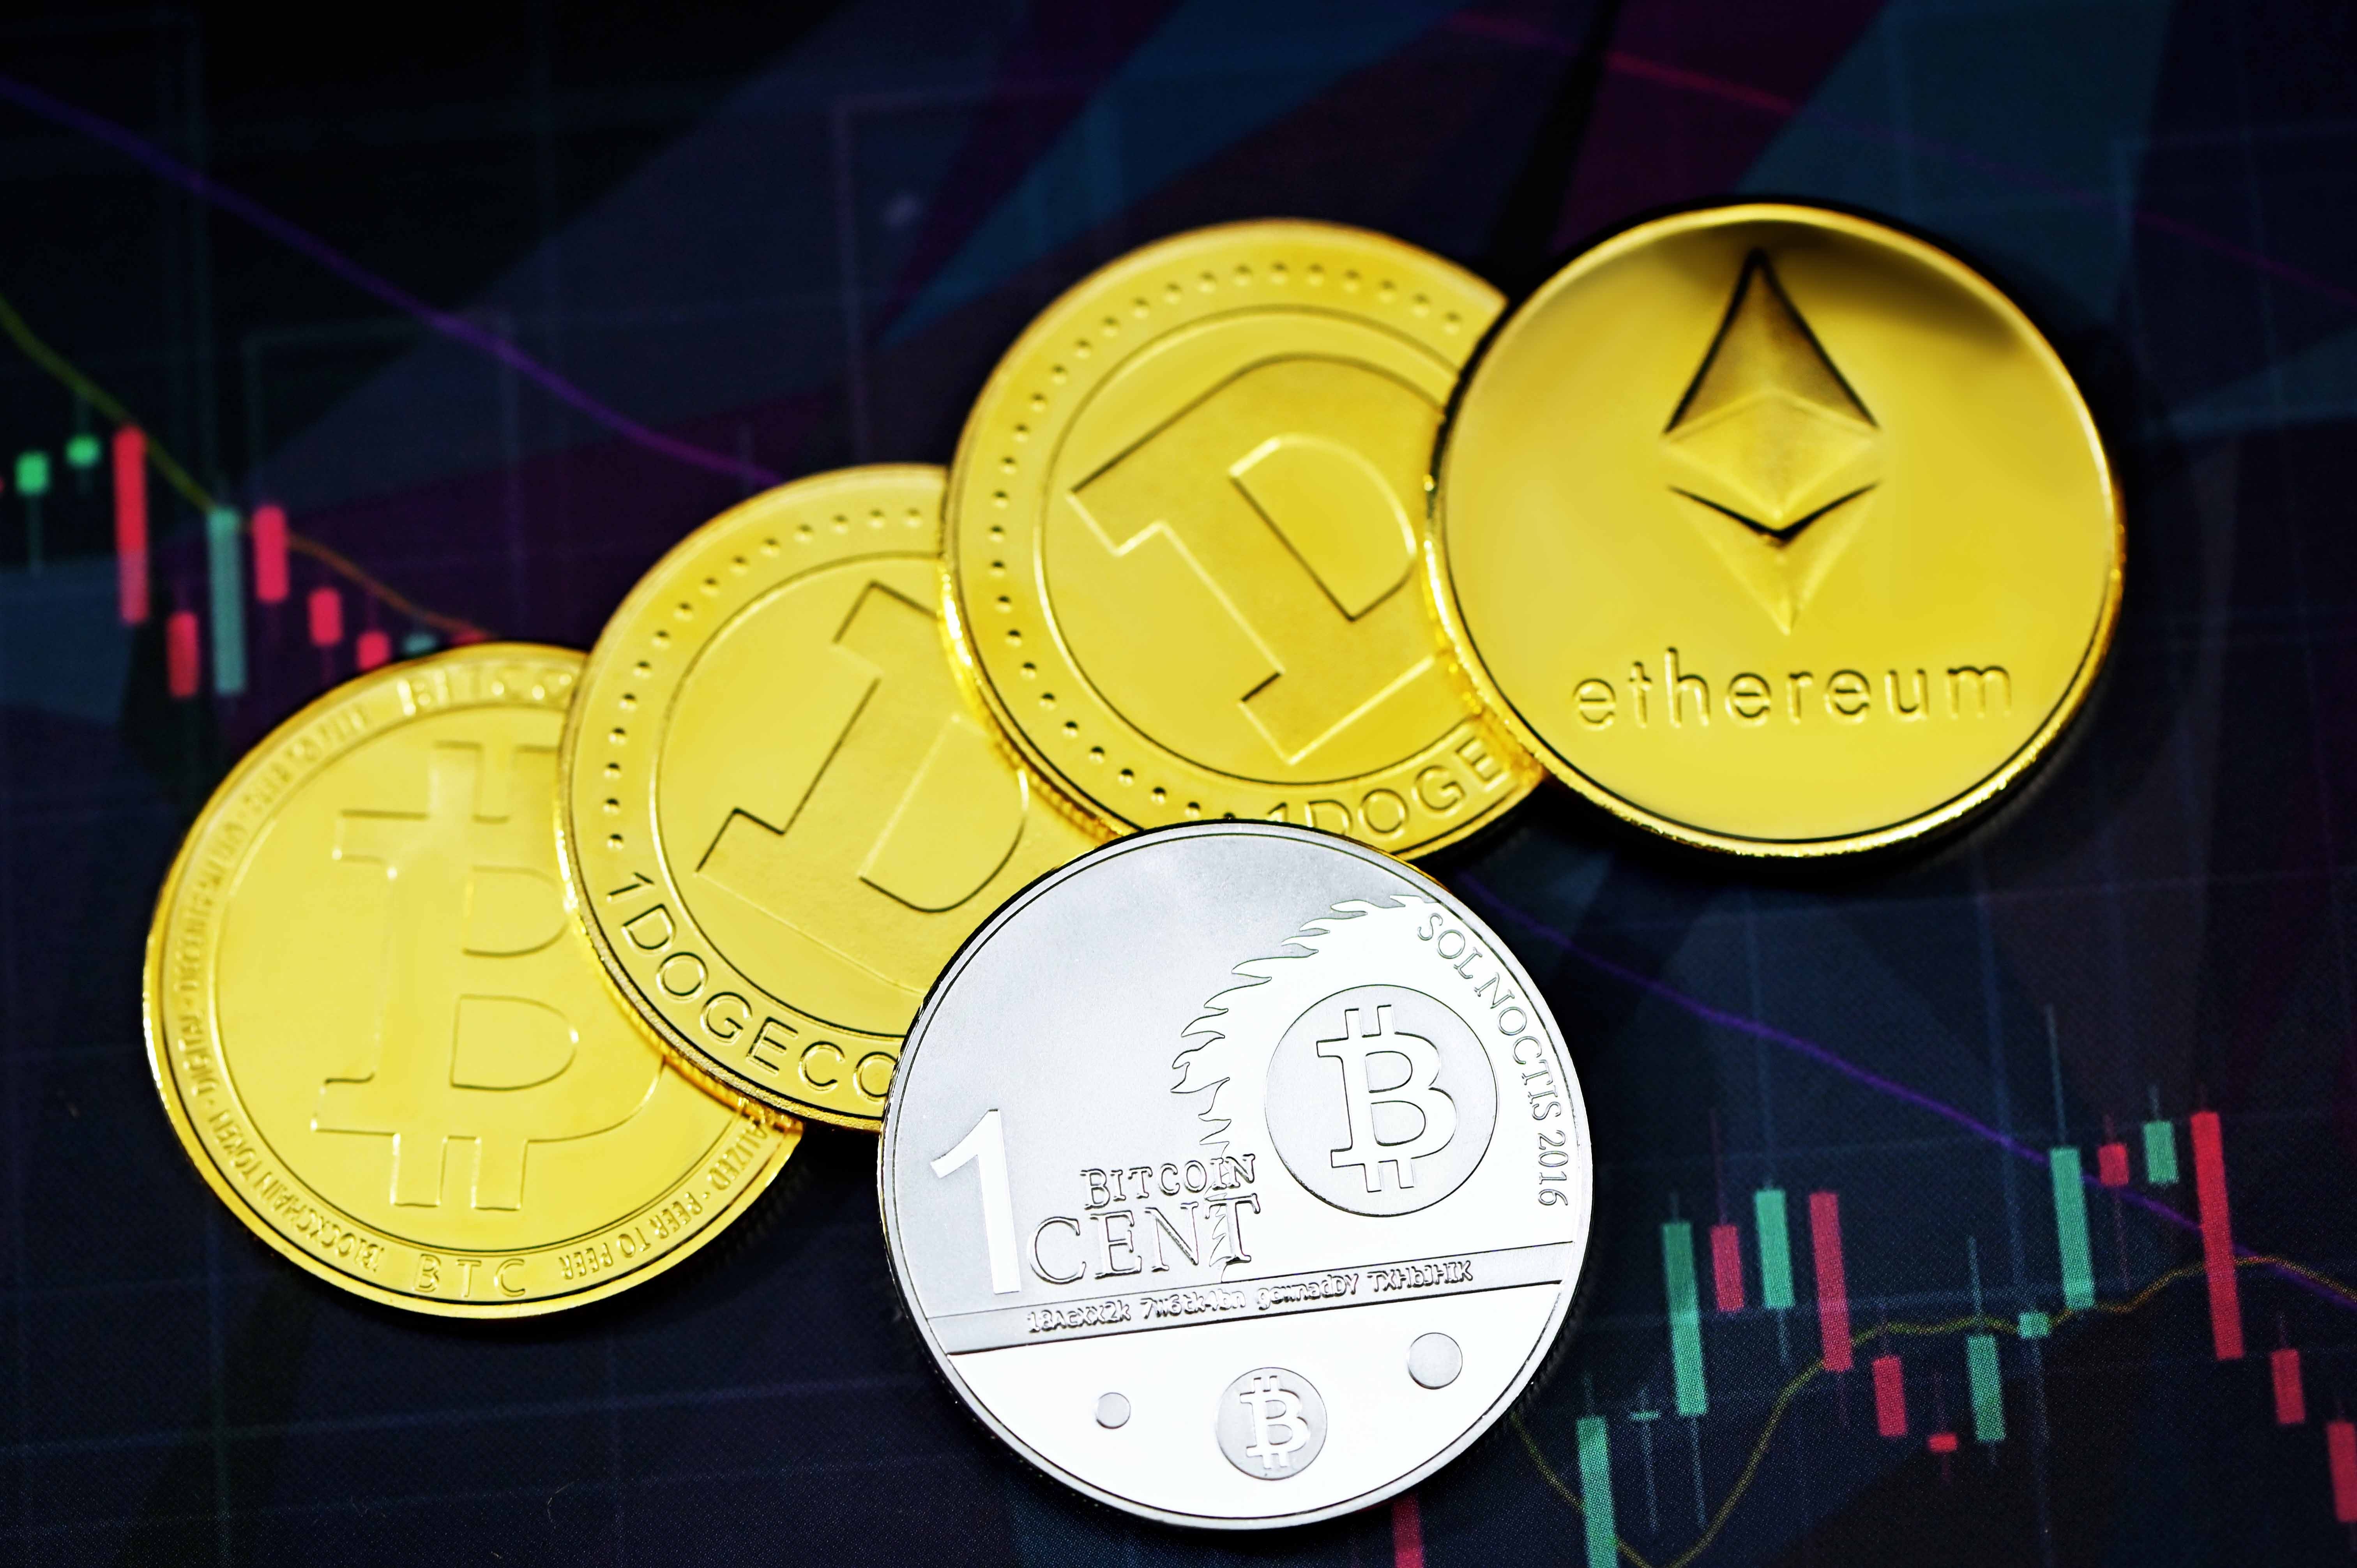 Bitcoin Holders Waiting For Higher Prices To Sell, Dogecoin Dips While Shiba Inu Rises; This Ethereum-Based Coin Is King Today